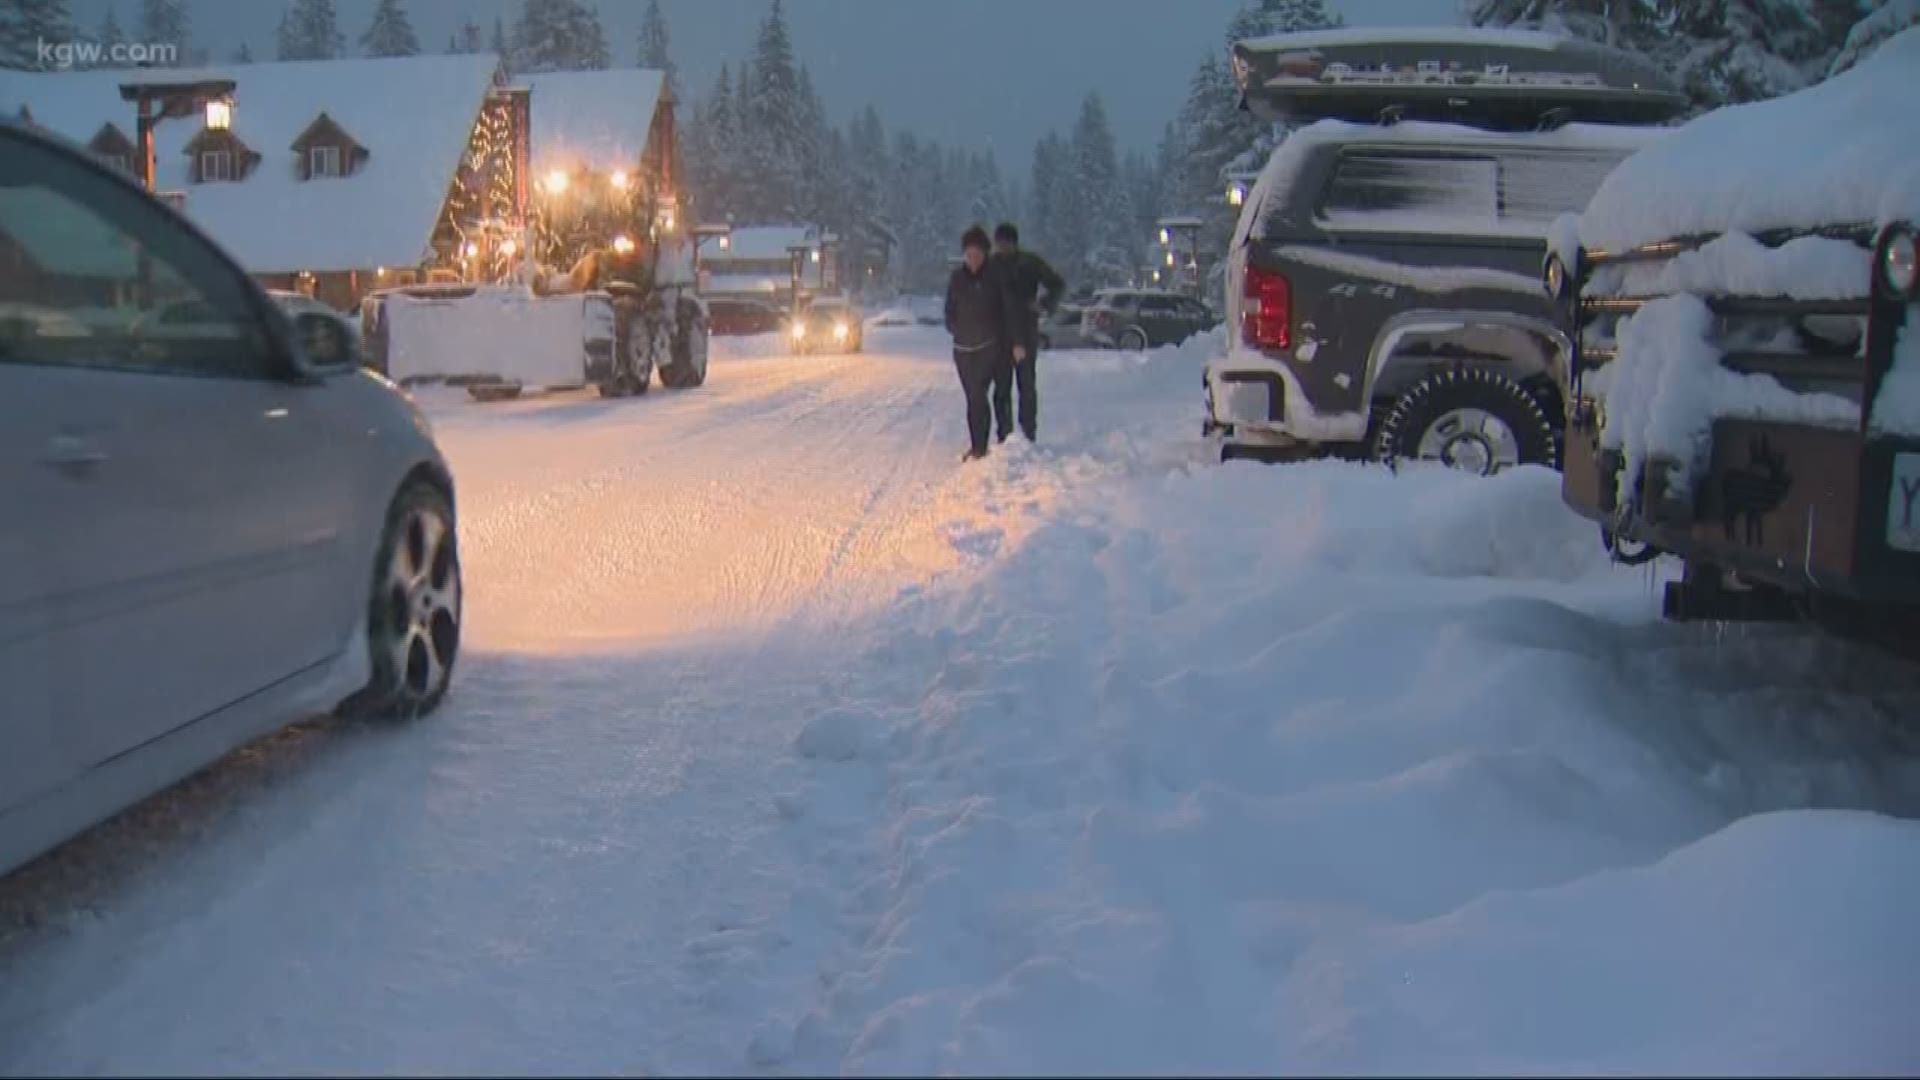 Mount Hood gets hammered with feet of snow.